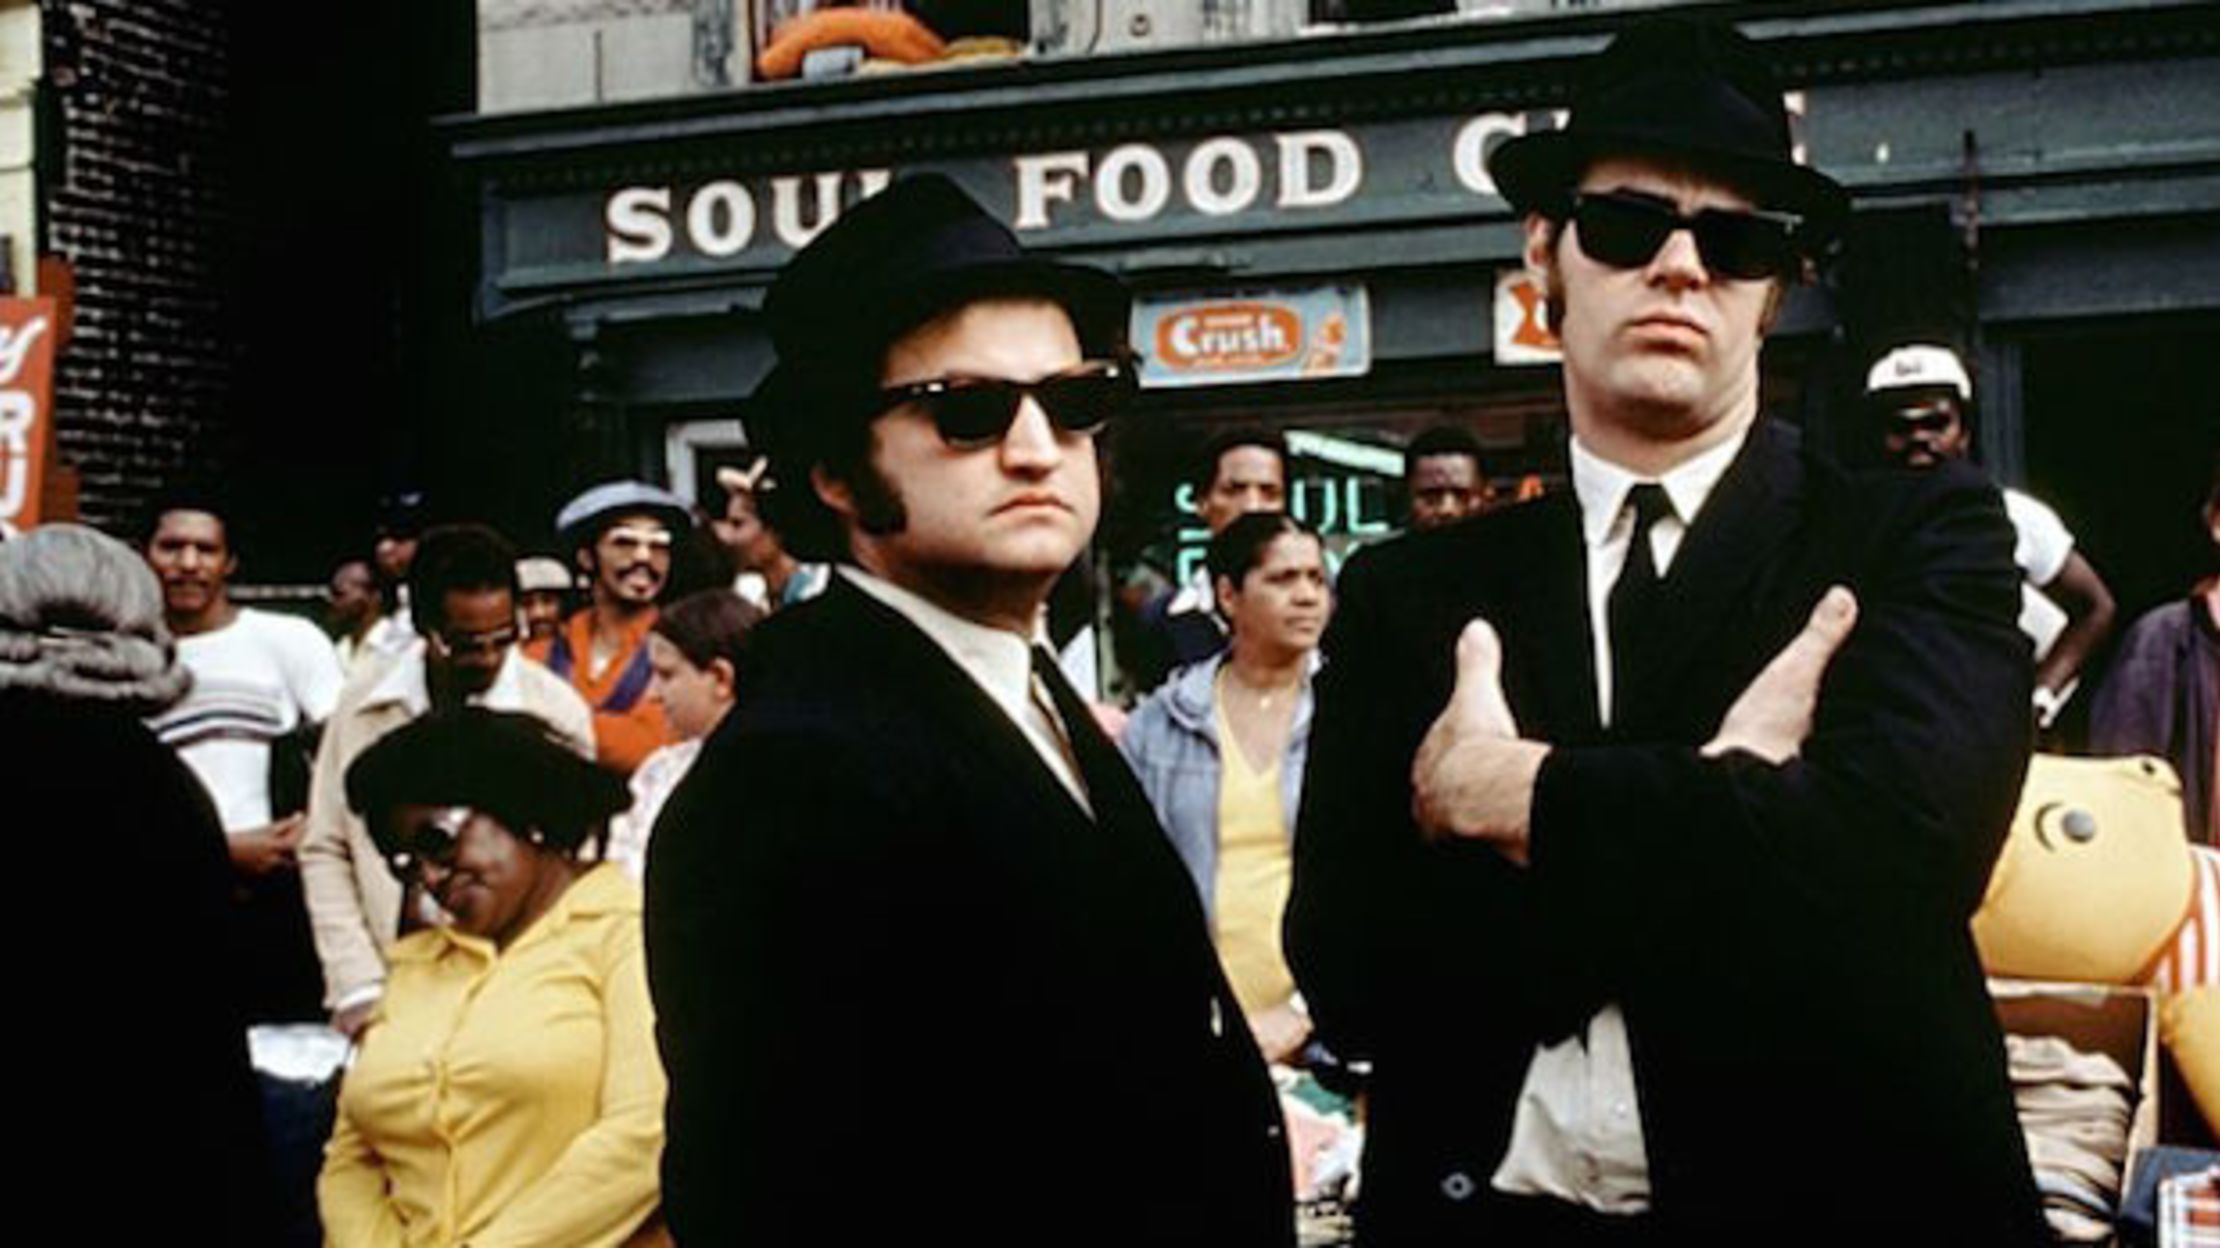 BLUES BROTHERS, his biography. The works of BLUES BROTHERS available at